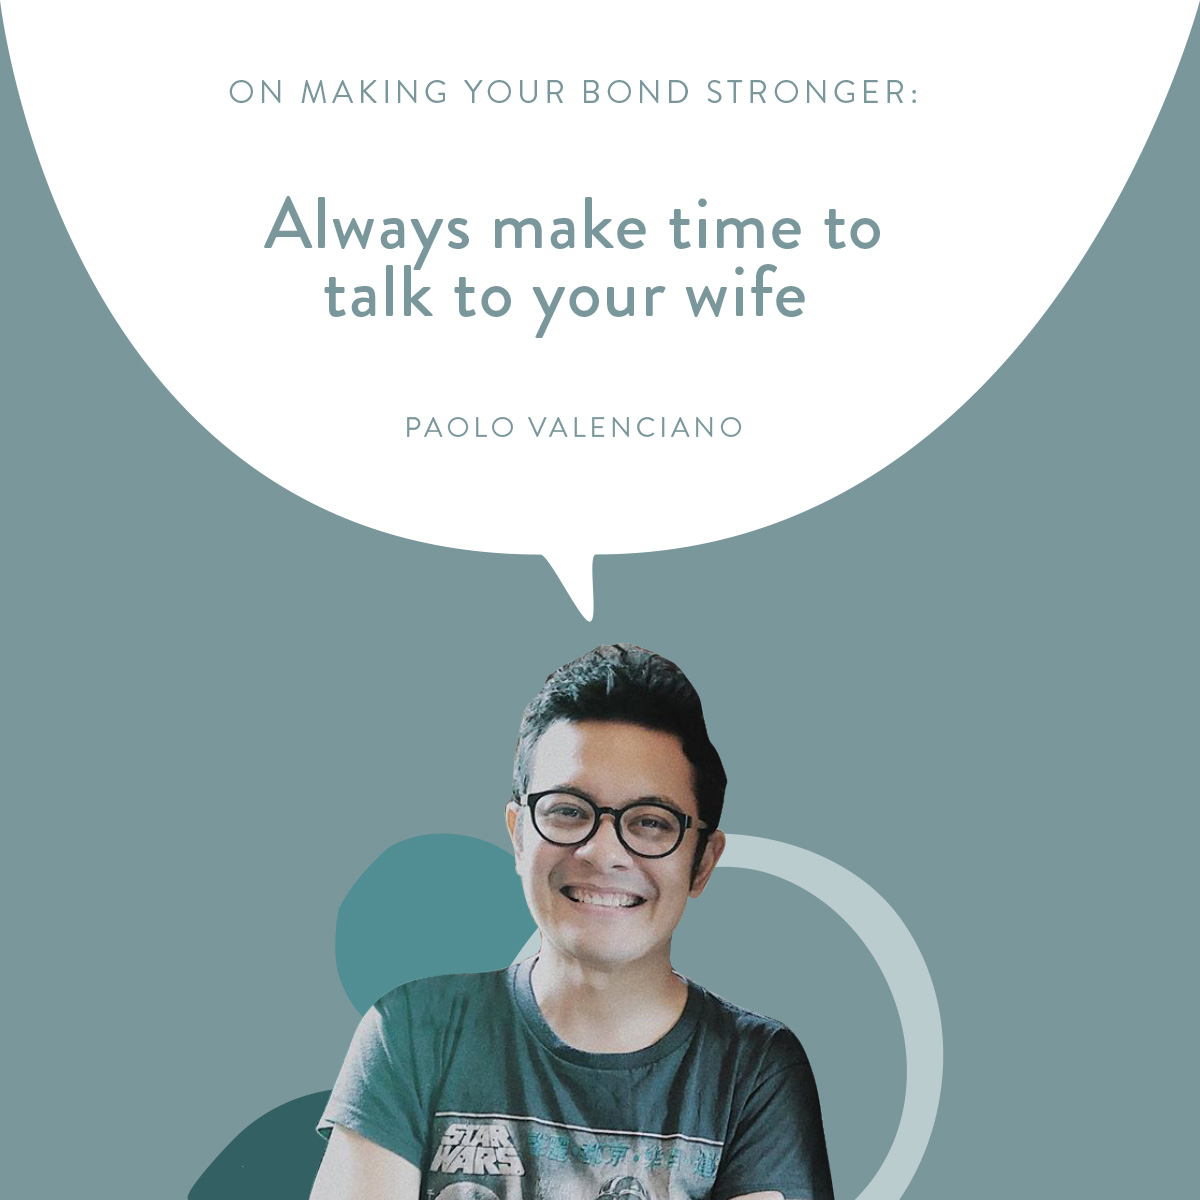 (Layout) On Making Your Bond Stonger:  Always make time to talk to your wife -Paulo Valenciano